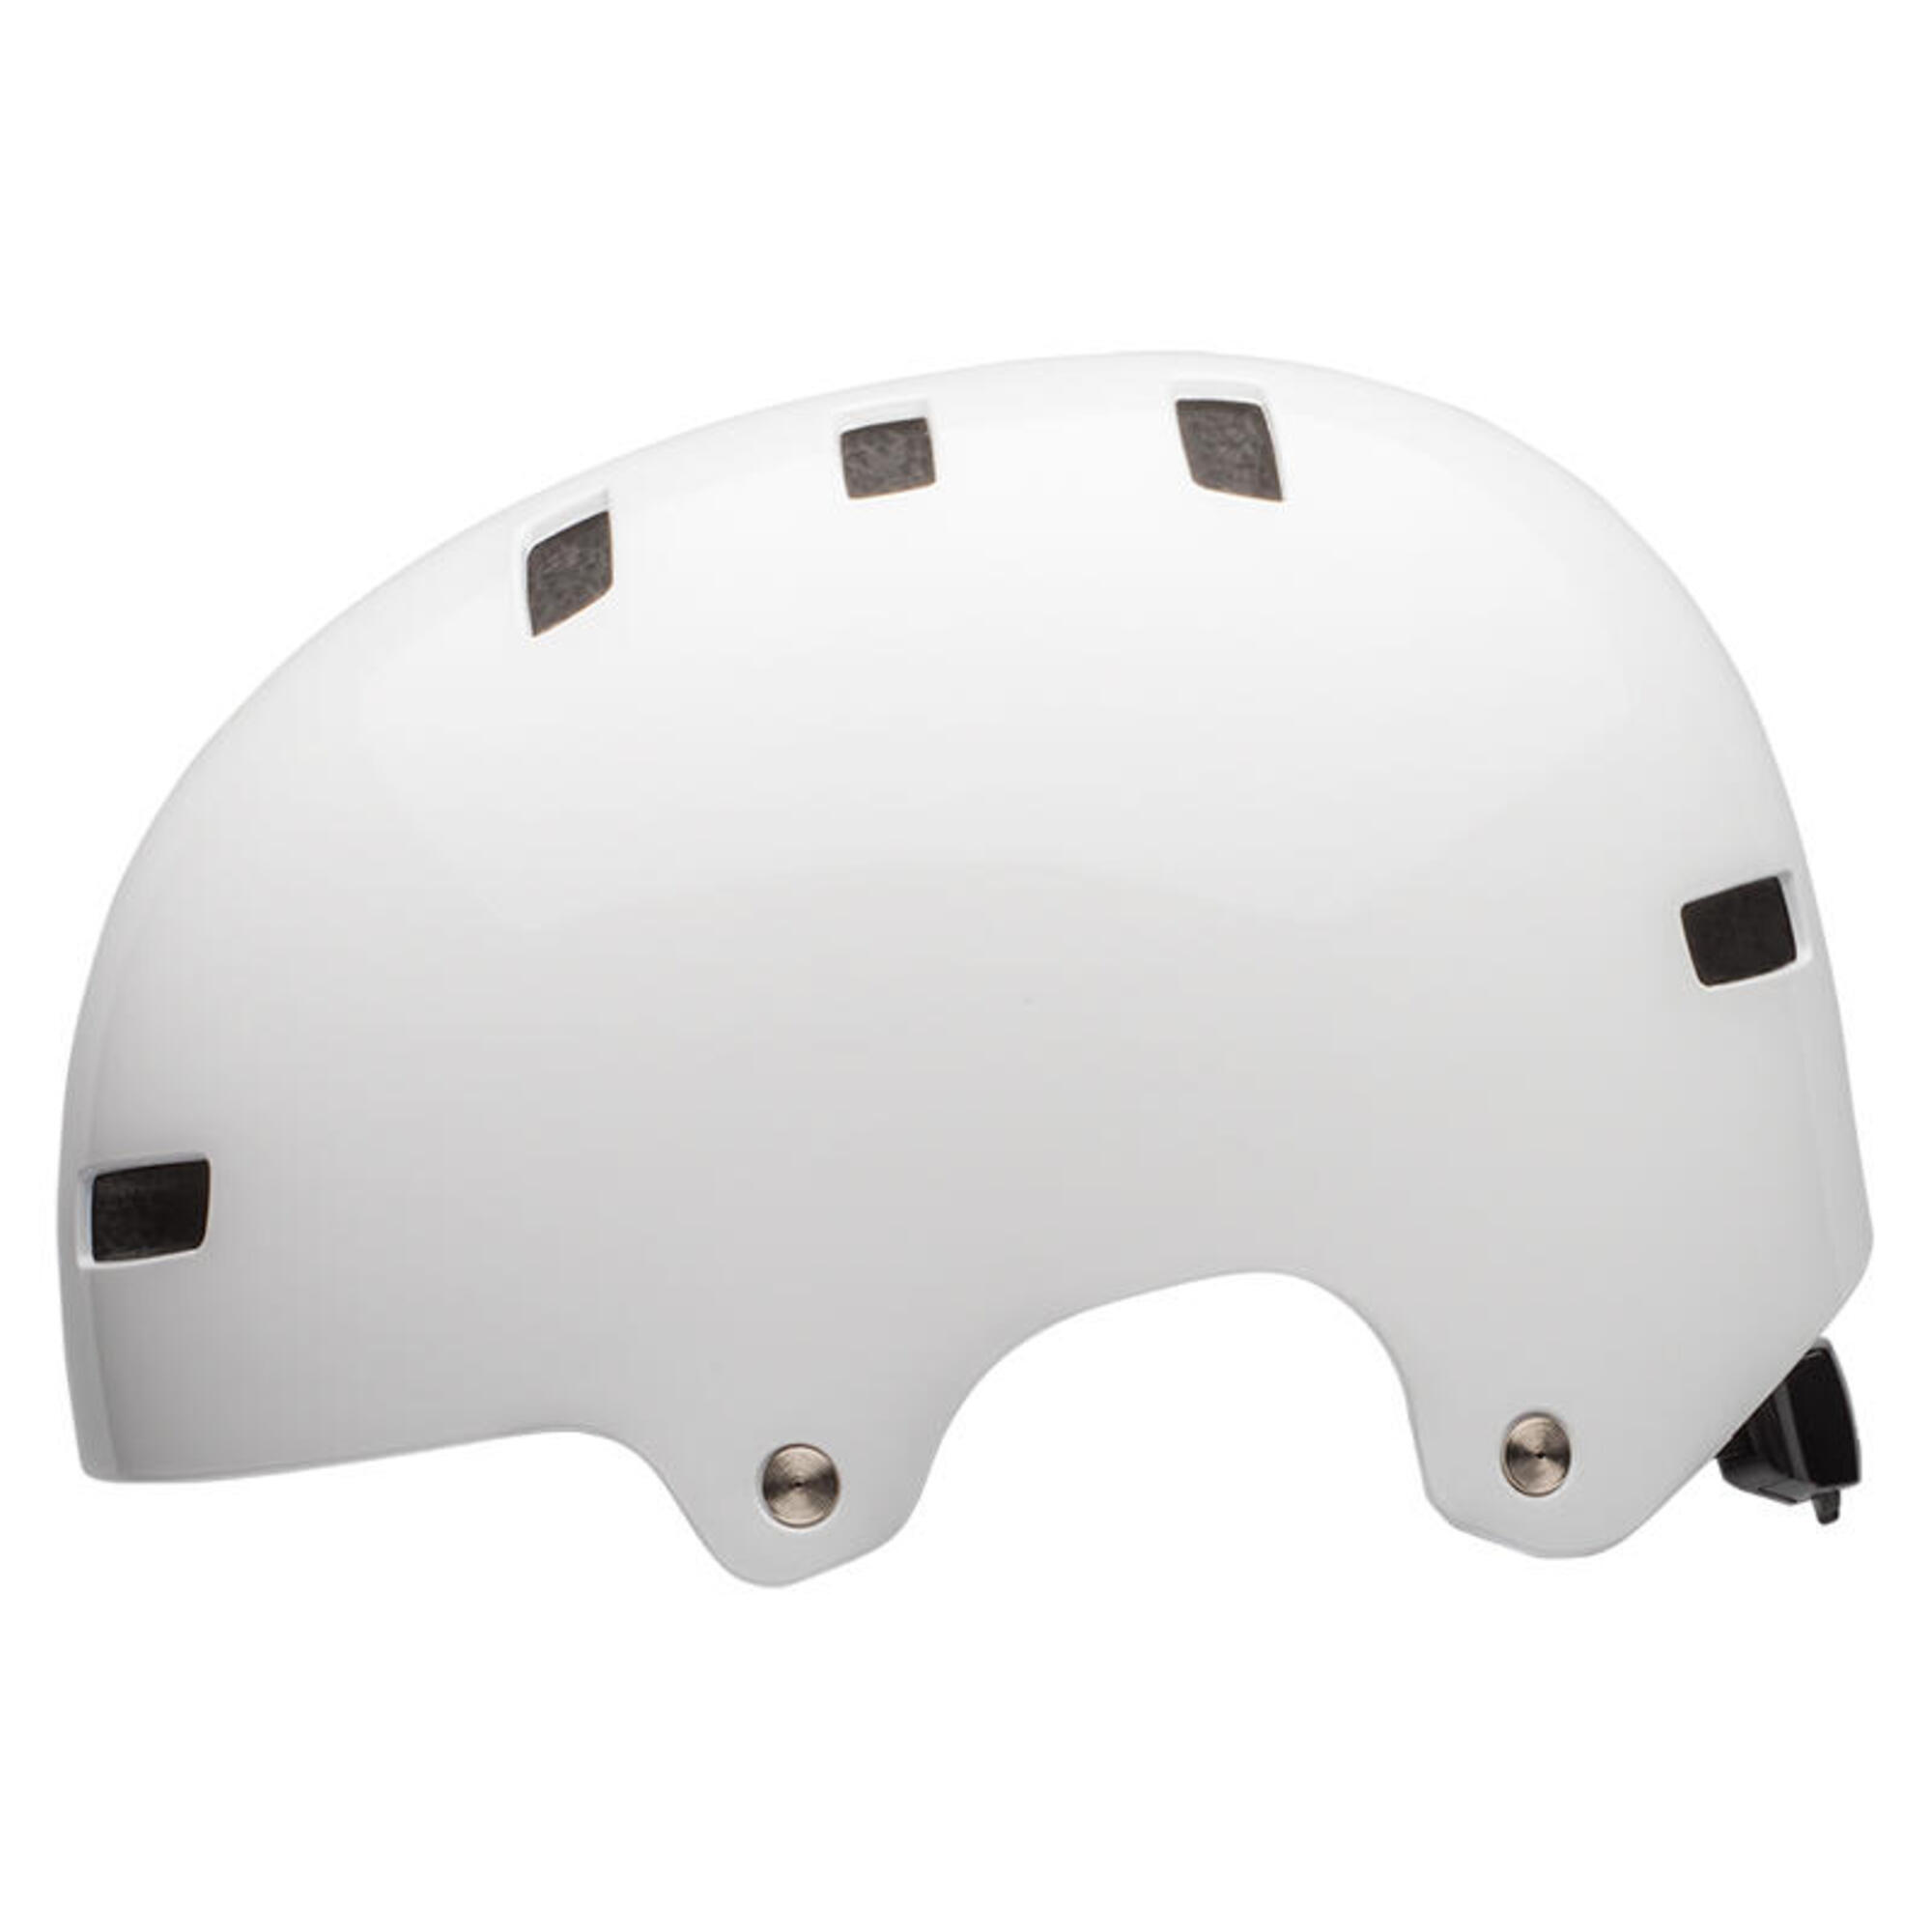 Kask Rowerowy Bmx Bell Local Gloss White M (55-59 cm)